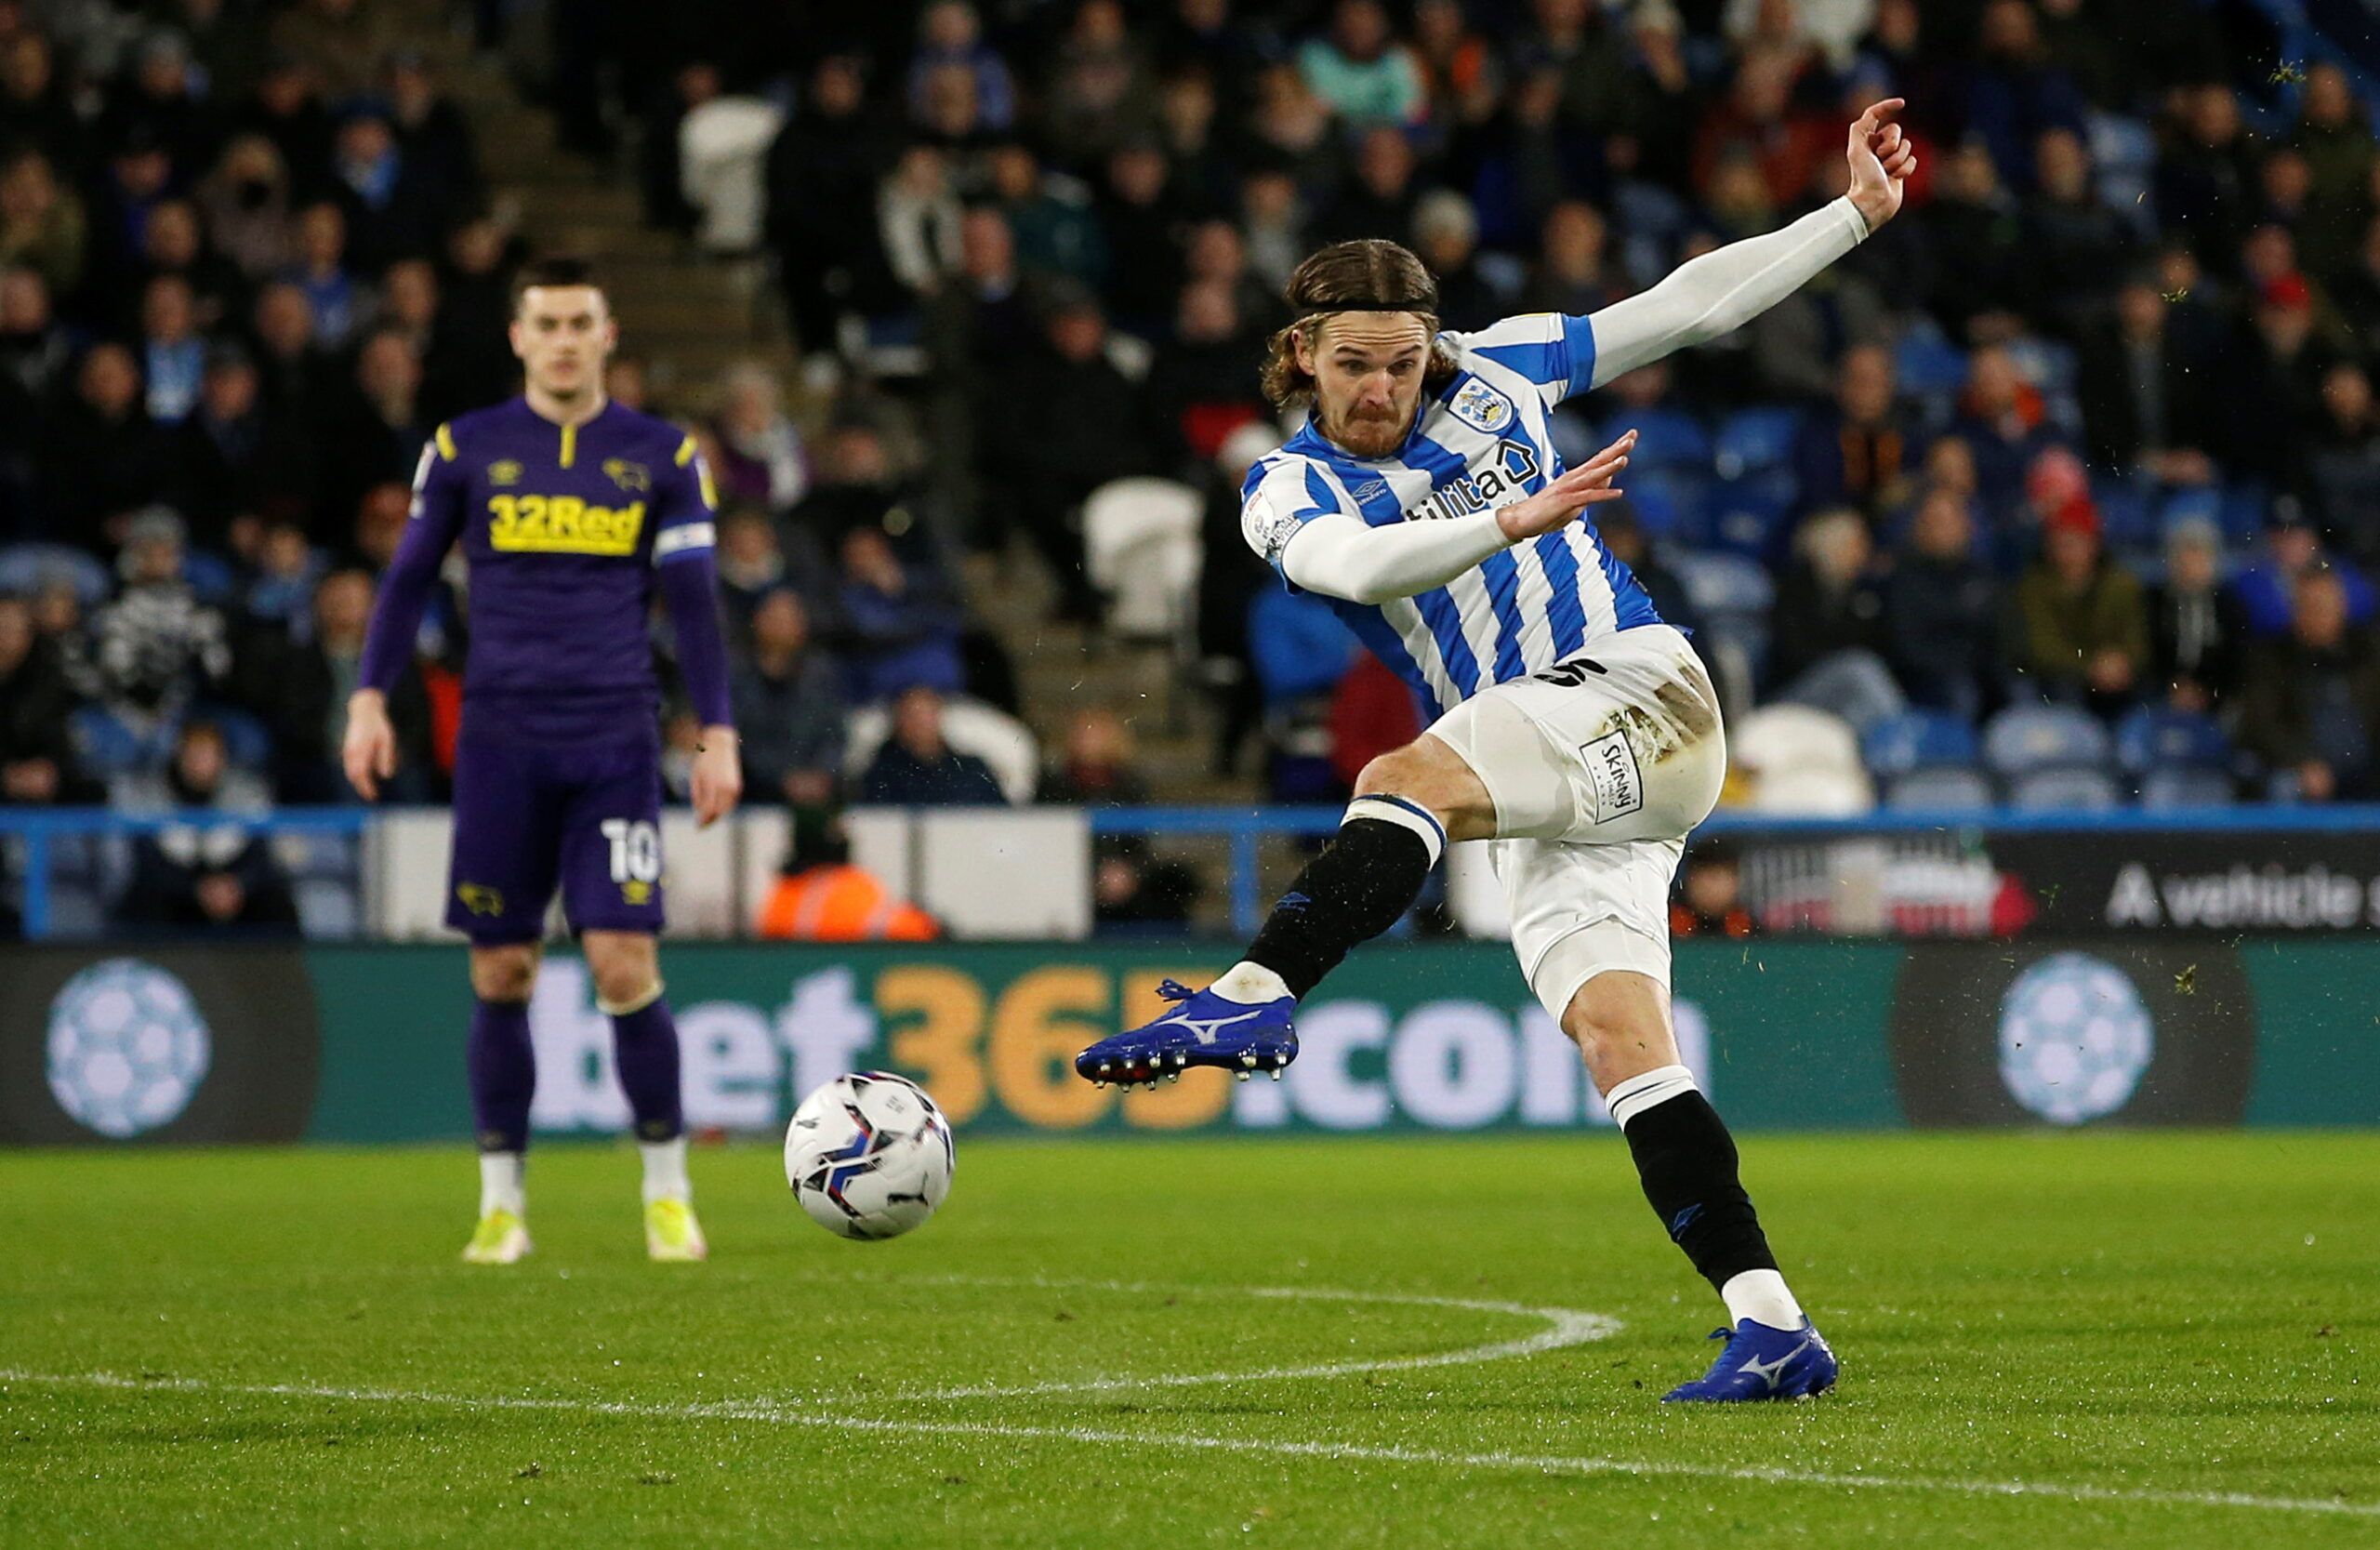 Soccer Football - Championship - Huddersfield Town v Derby County - John Smith's Stadium, Huddersfield, Britain - February 2, 2022 Huddersfield Town's Danny Ward shoots at goal  Action Images/Ed Sykes EDITORIAL USE ONLY. No use with unauthorized audio, video, data, fixture lists, club/league logos or 'live' services. Online in-match use limited to 75 images, no video emulation. No use in betting, games or single club /league/player publications. Please contact your account representative for fur